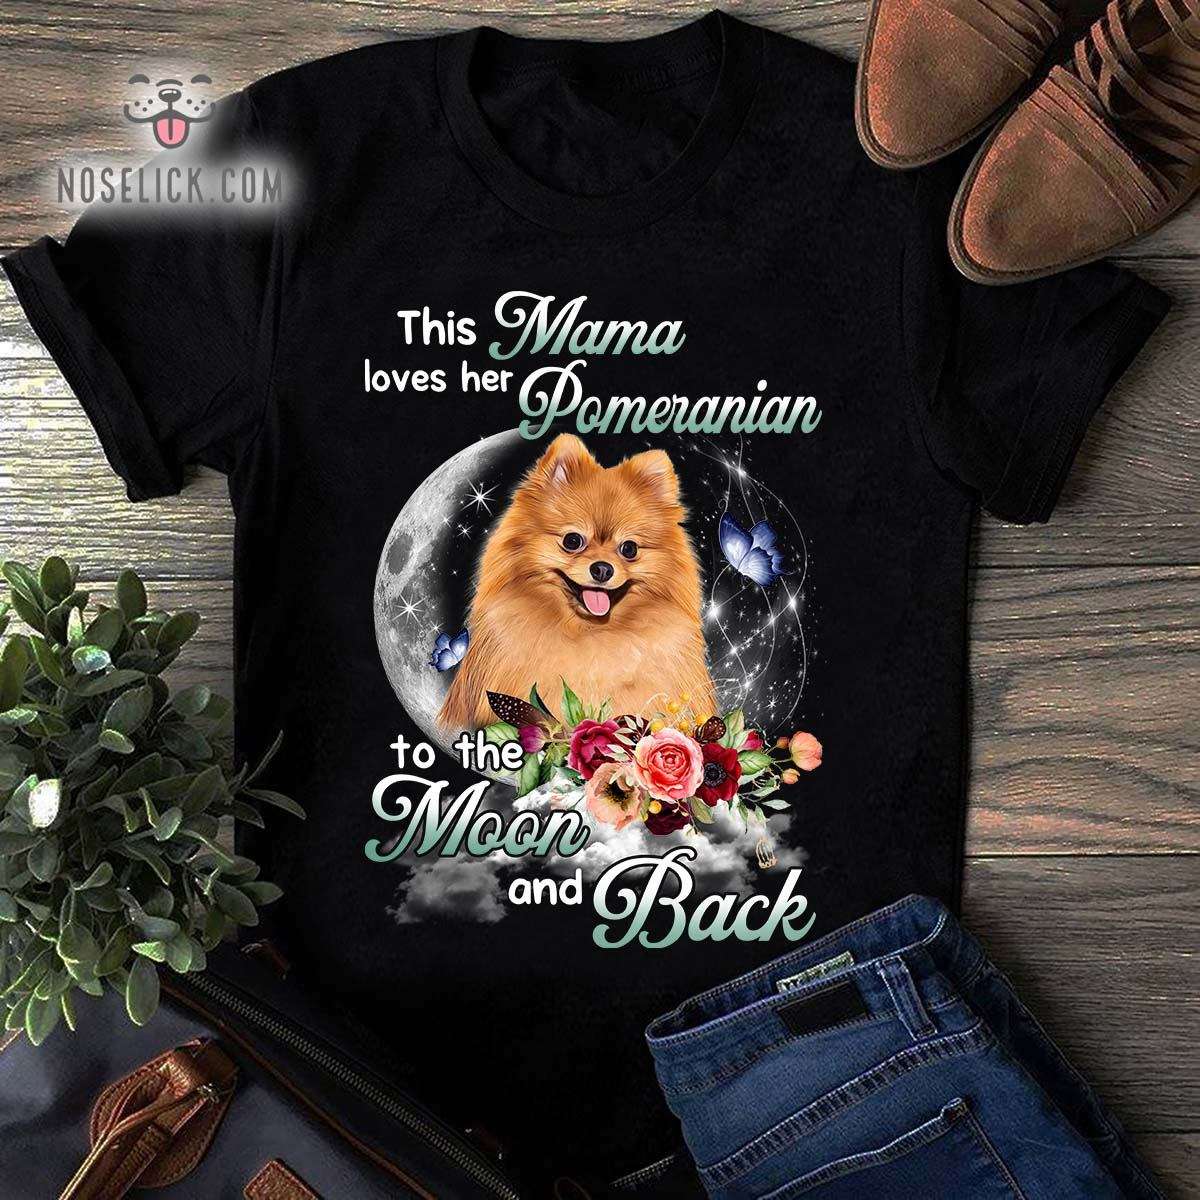 This Mama loves her pomeranian to the moon and back - Dog lover, dog mom